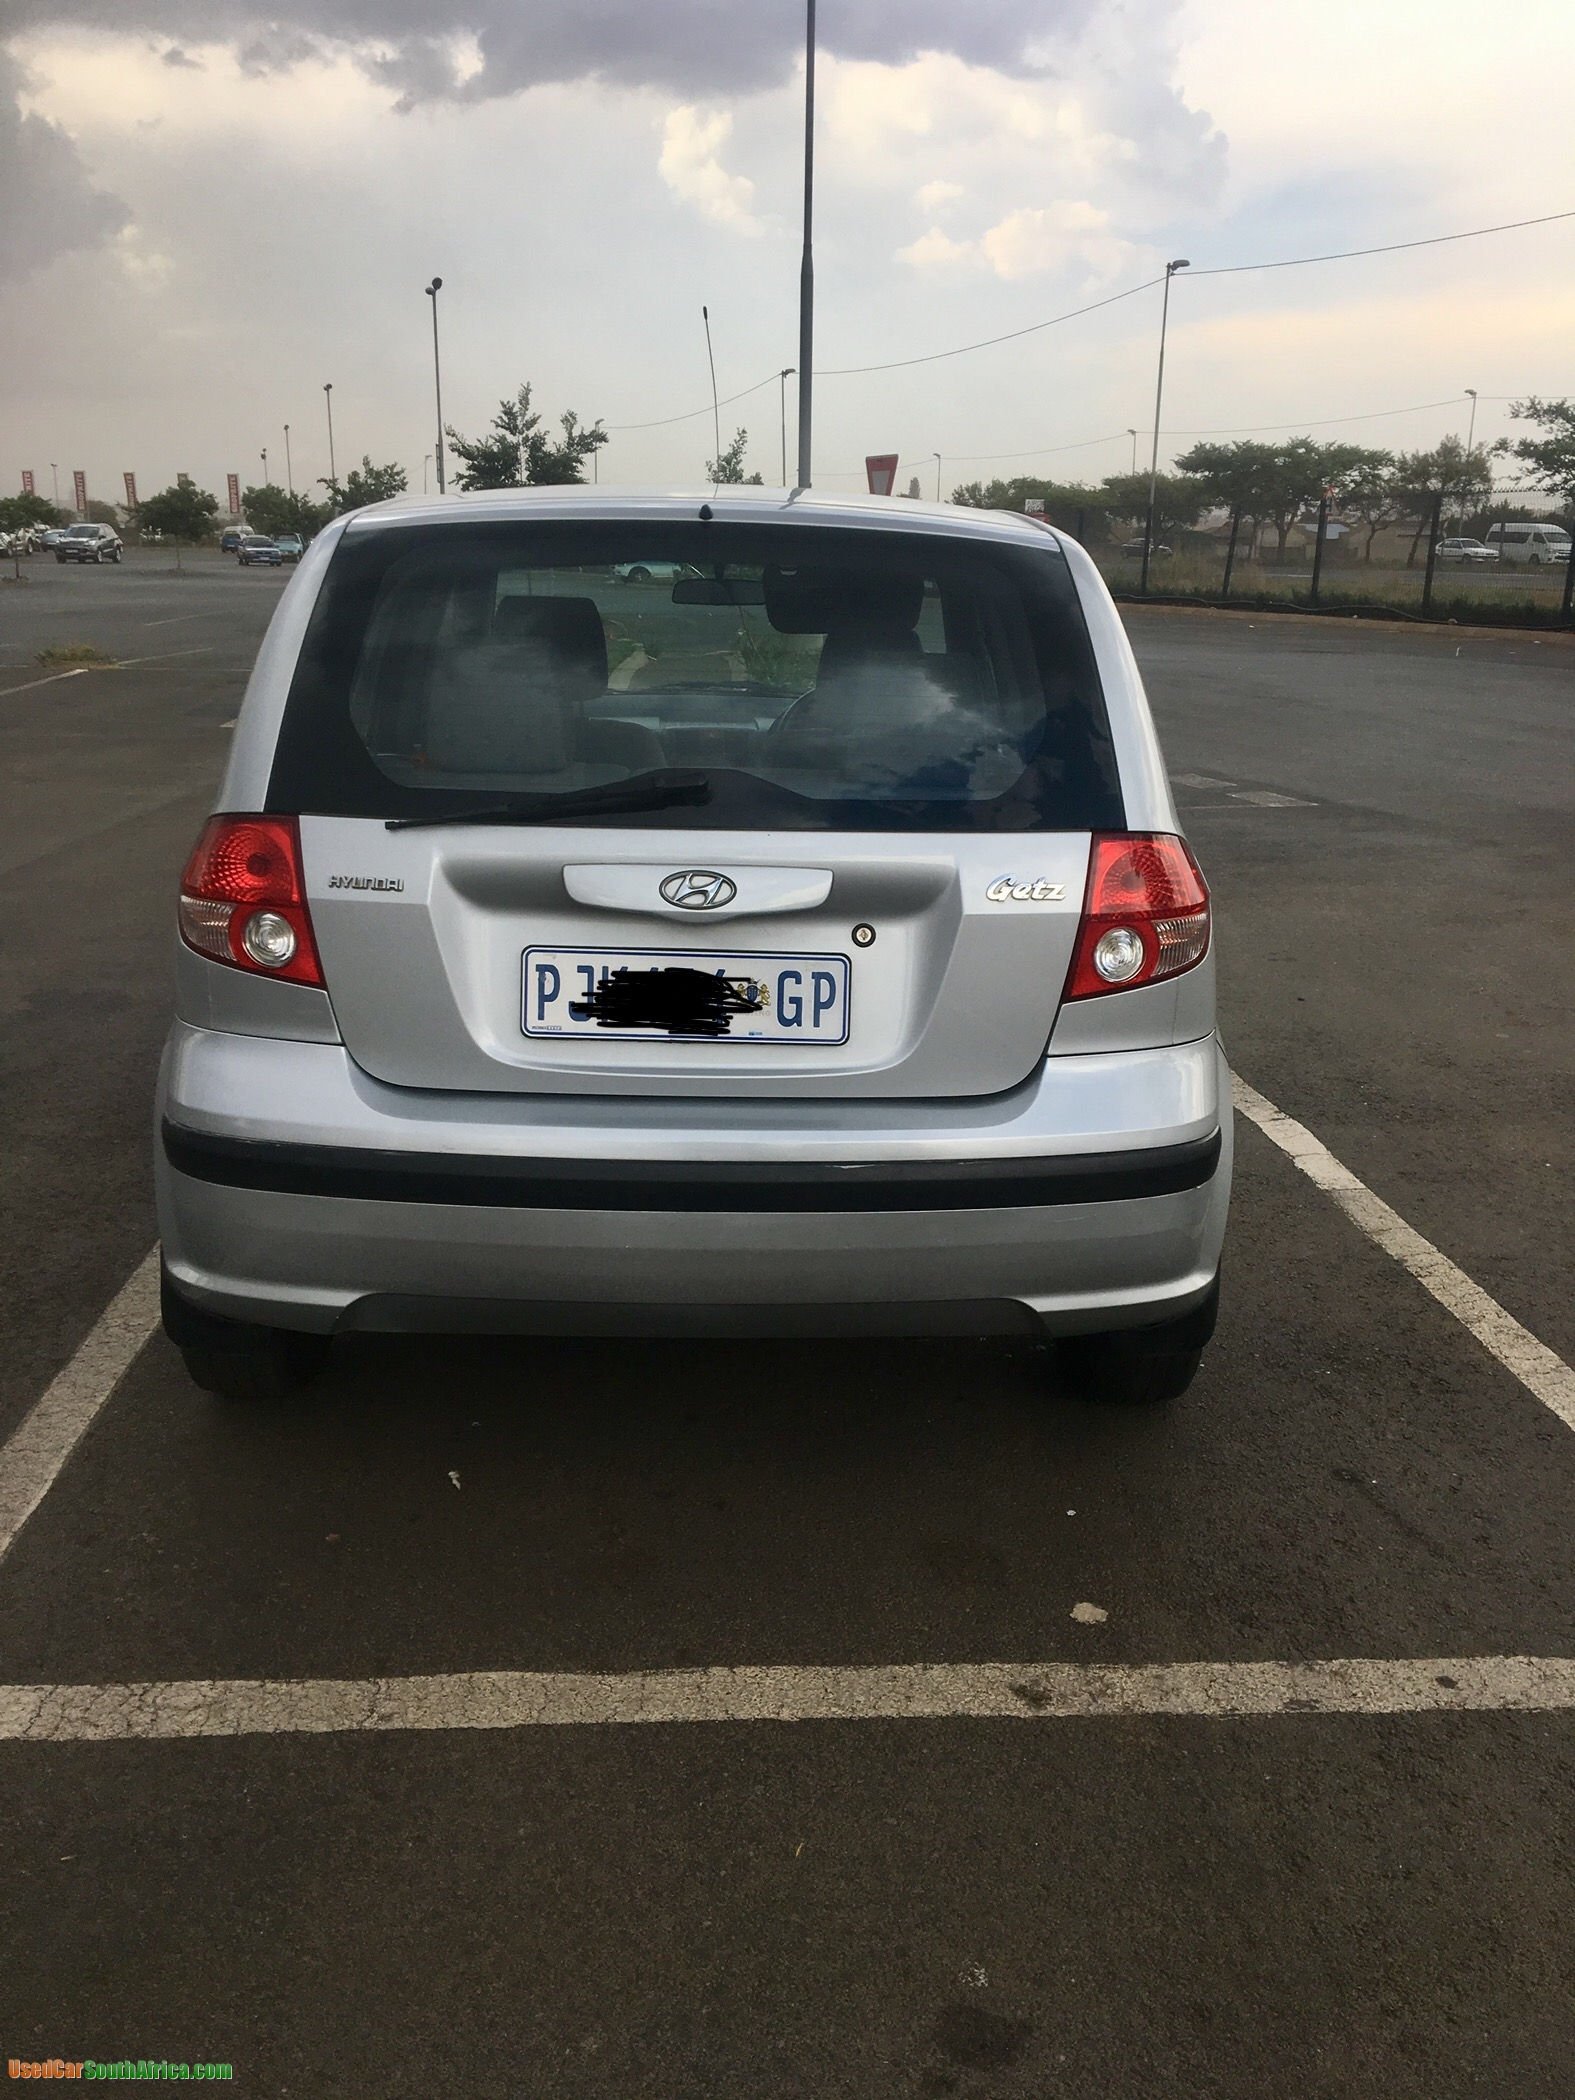 2017 Hyundai Getz 1.3 used car for sale in Johannesburg South Gauteng South Africa ...